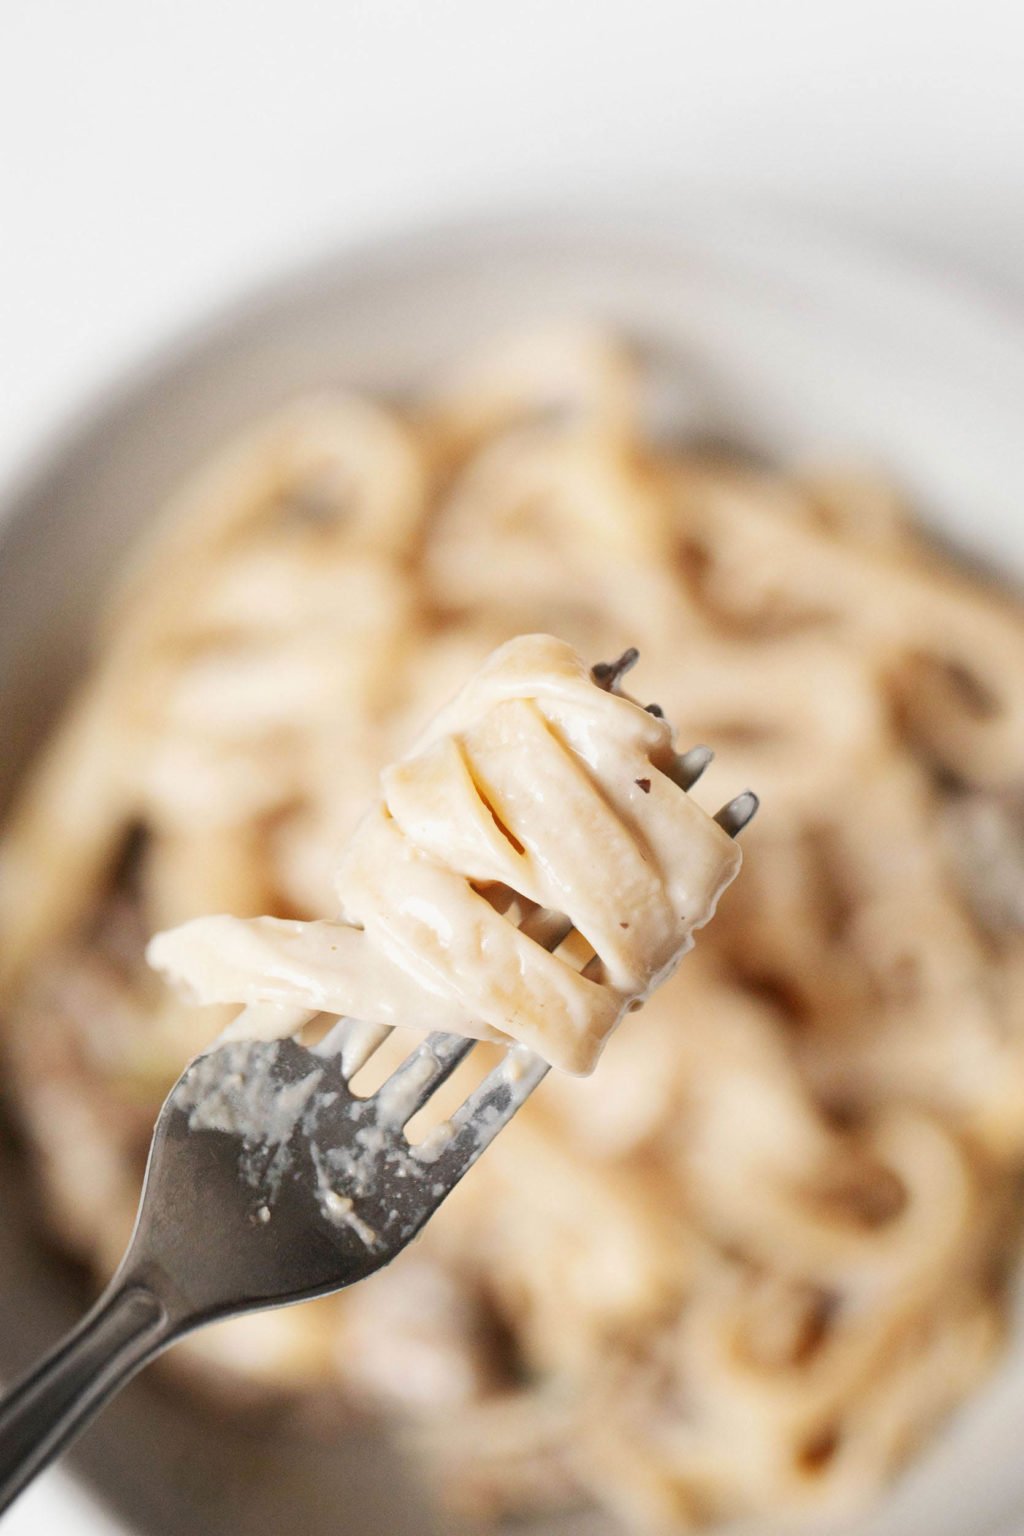 A creamy fettucine dish is being twirled with a fork.